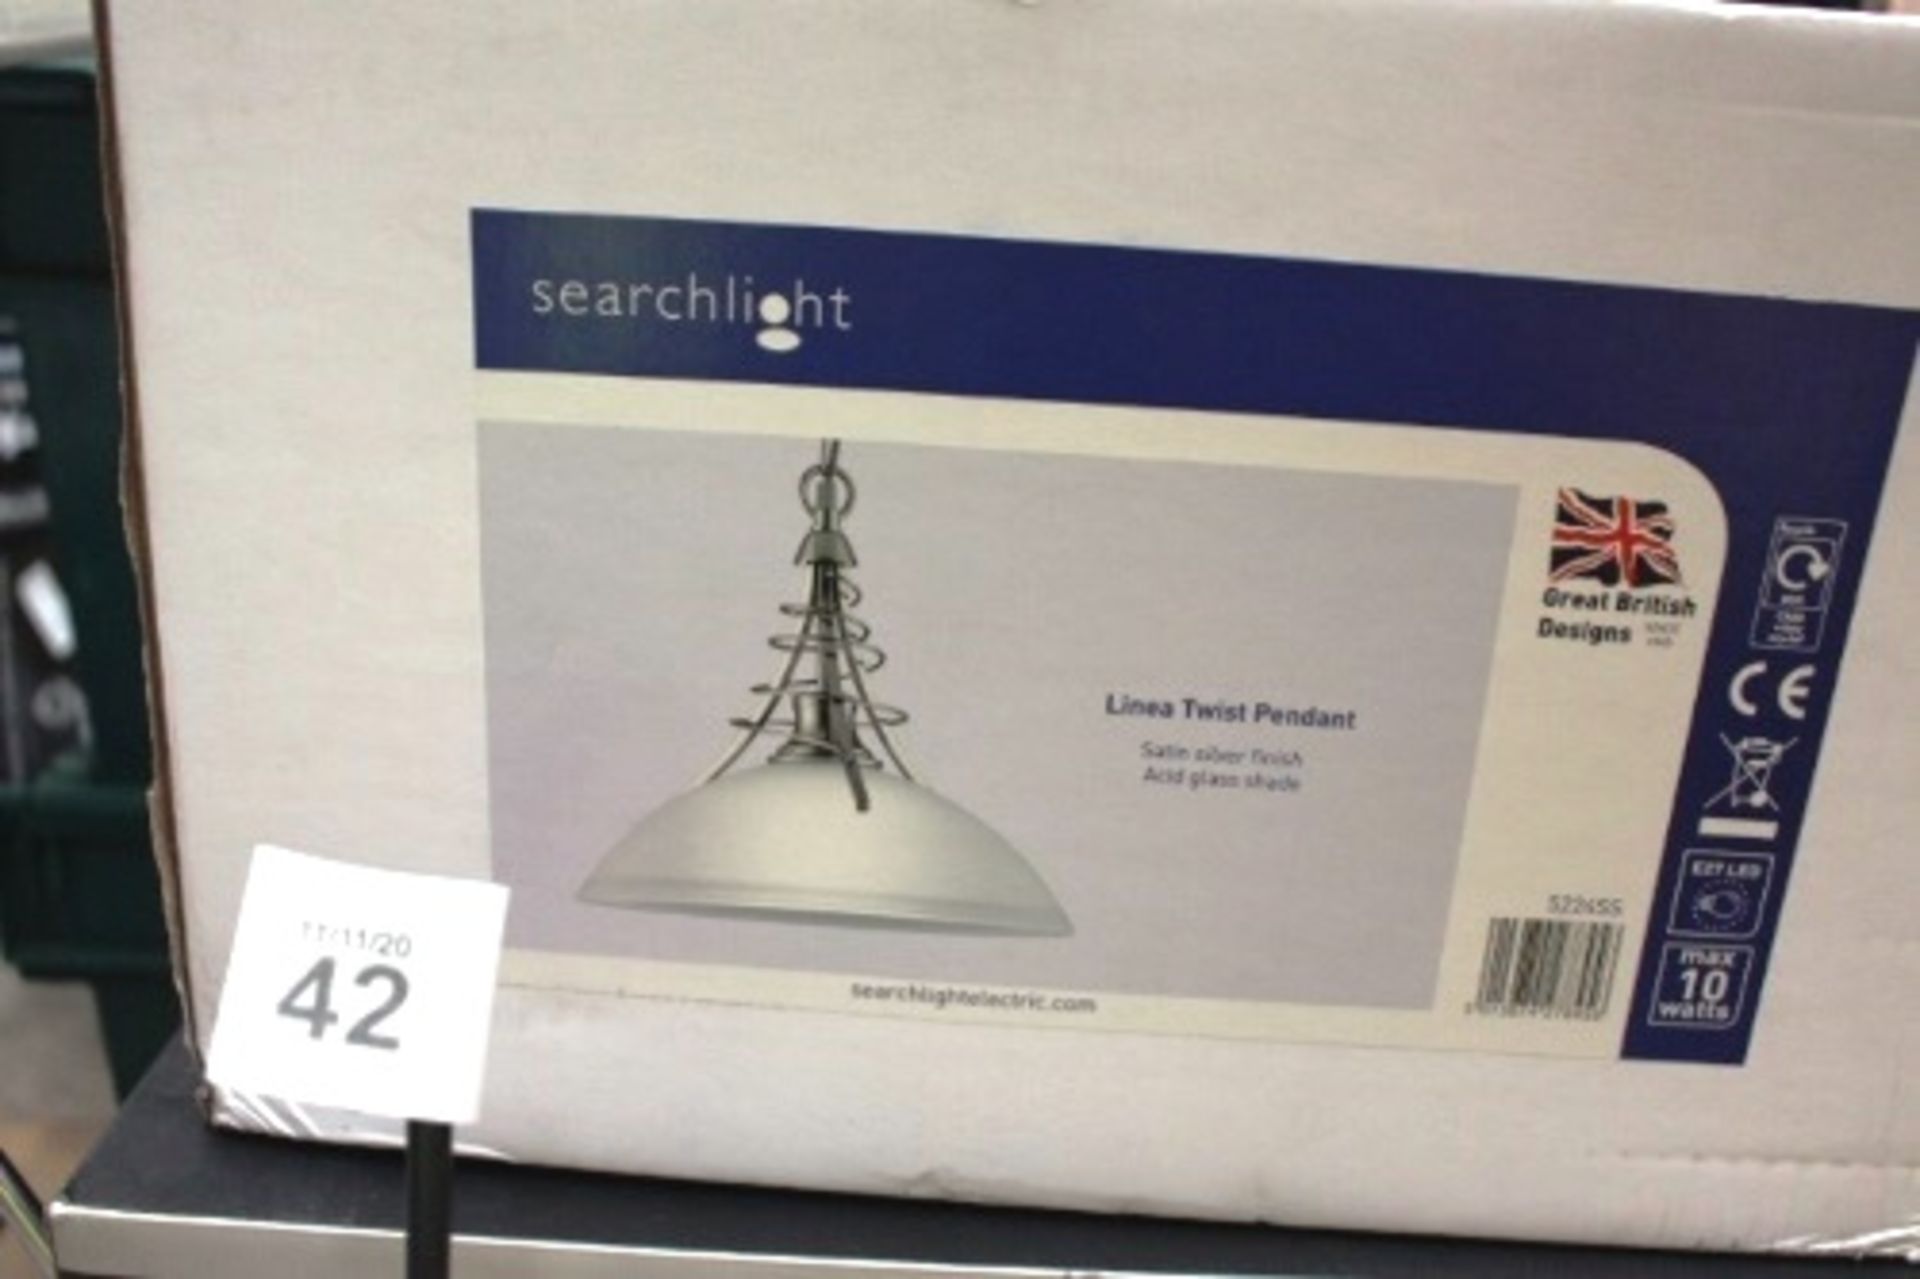 Felicity chrome light ceiling fitting, model D2608, sealed new in box together with a quantity - Image 3 of 5